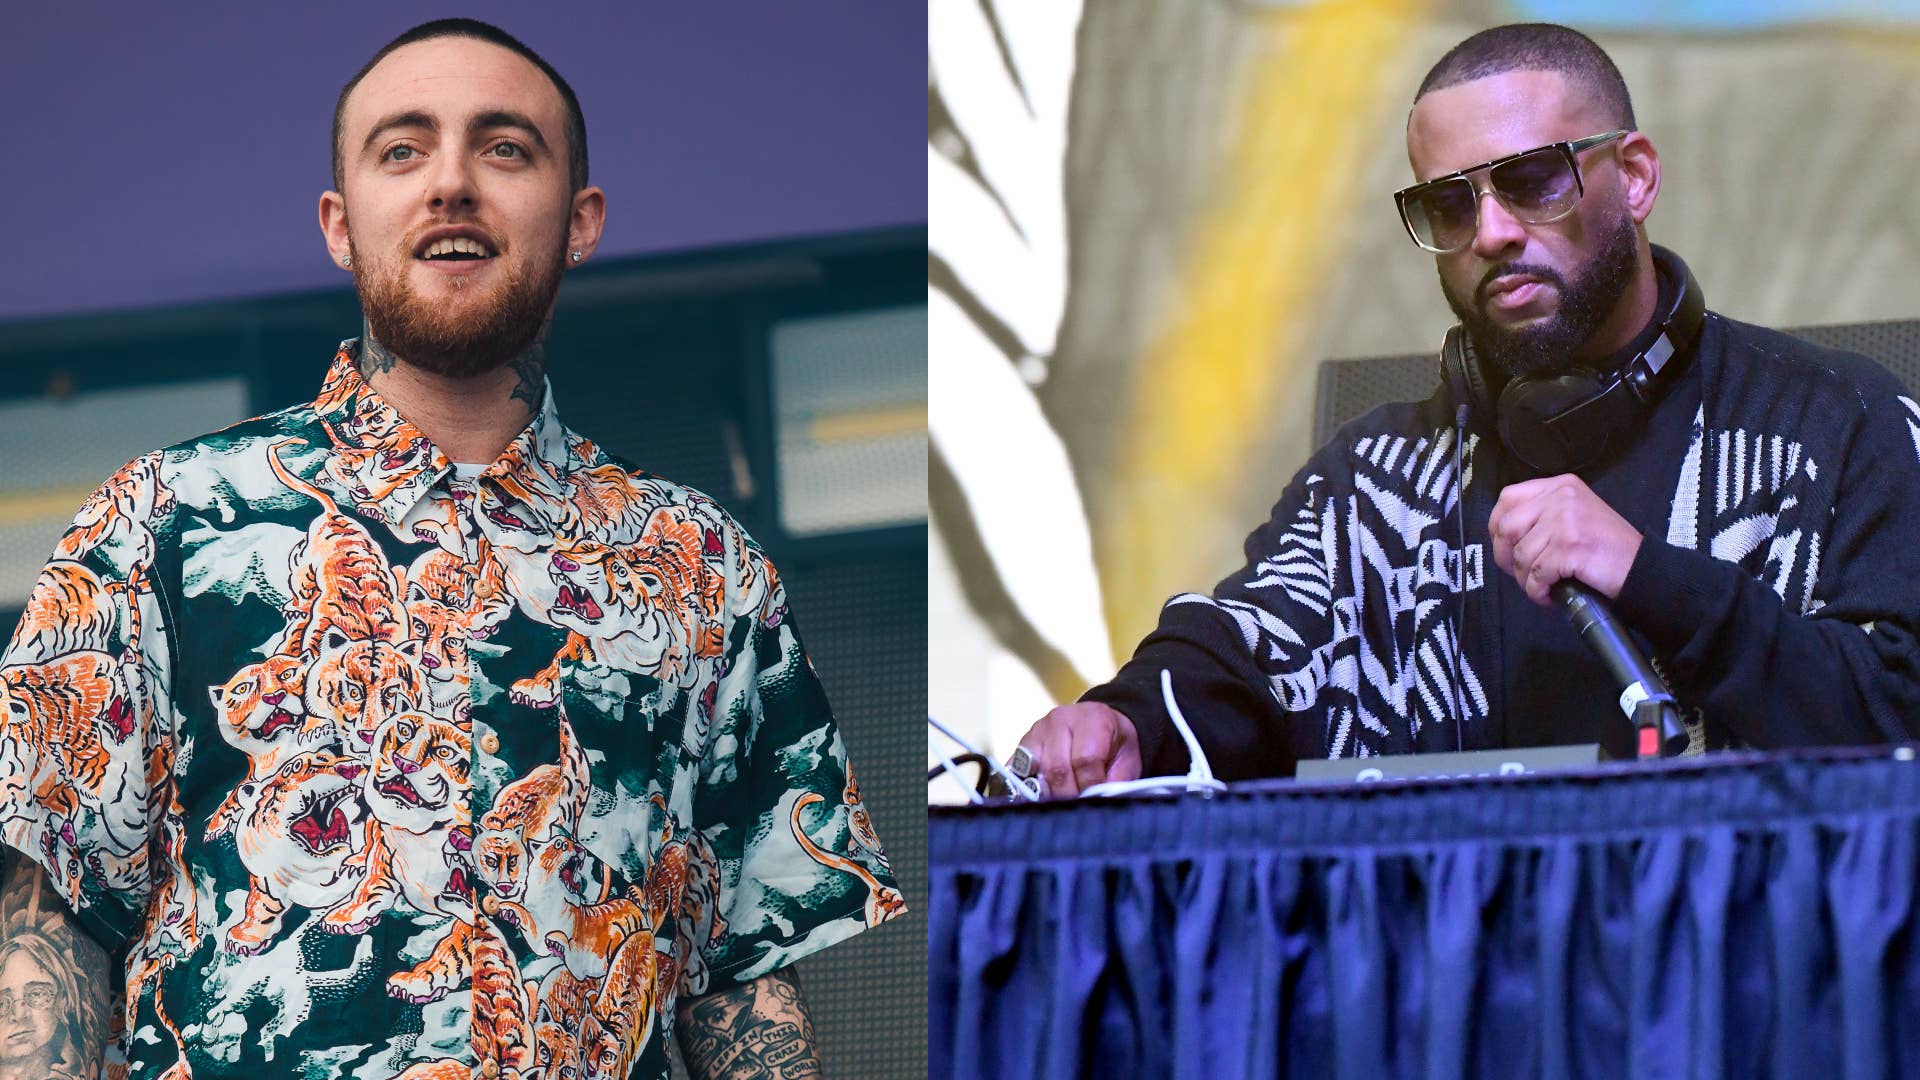 Mac Miller and Madlib pictured at separate shows